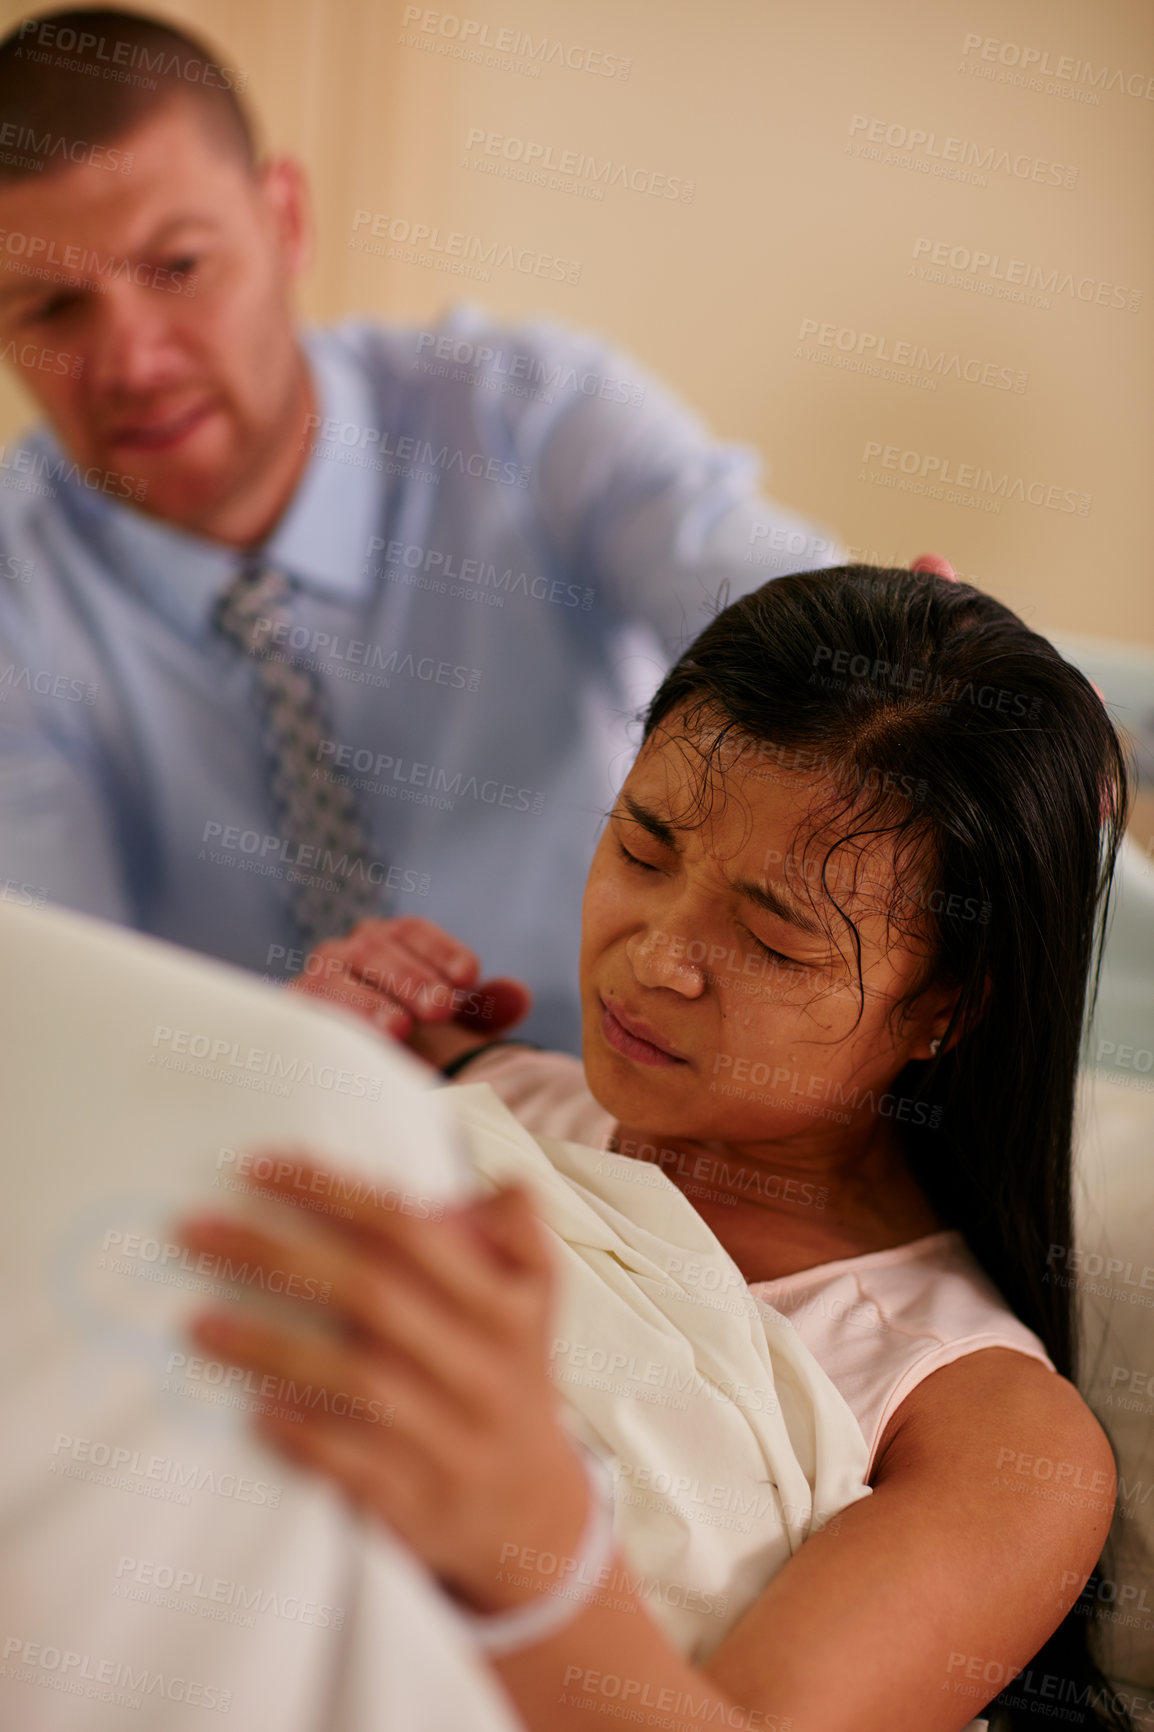 Buy stock photo Shot of a young woman giving birth with her husband supporting her in the background